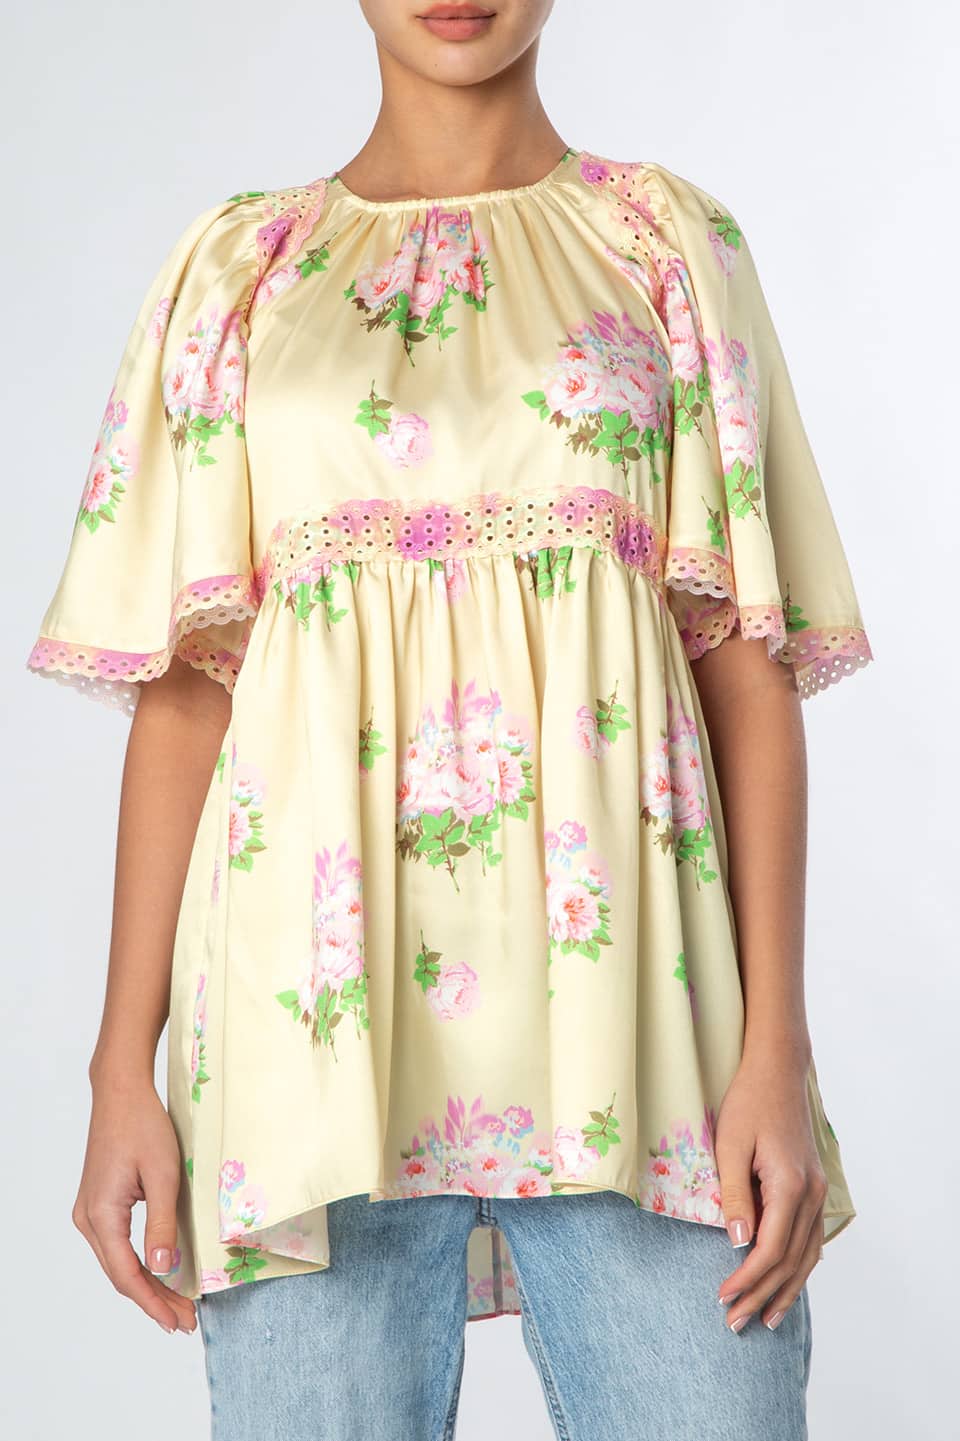 Manoush religeuse blossom tunic dress. Product gallery 1